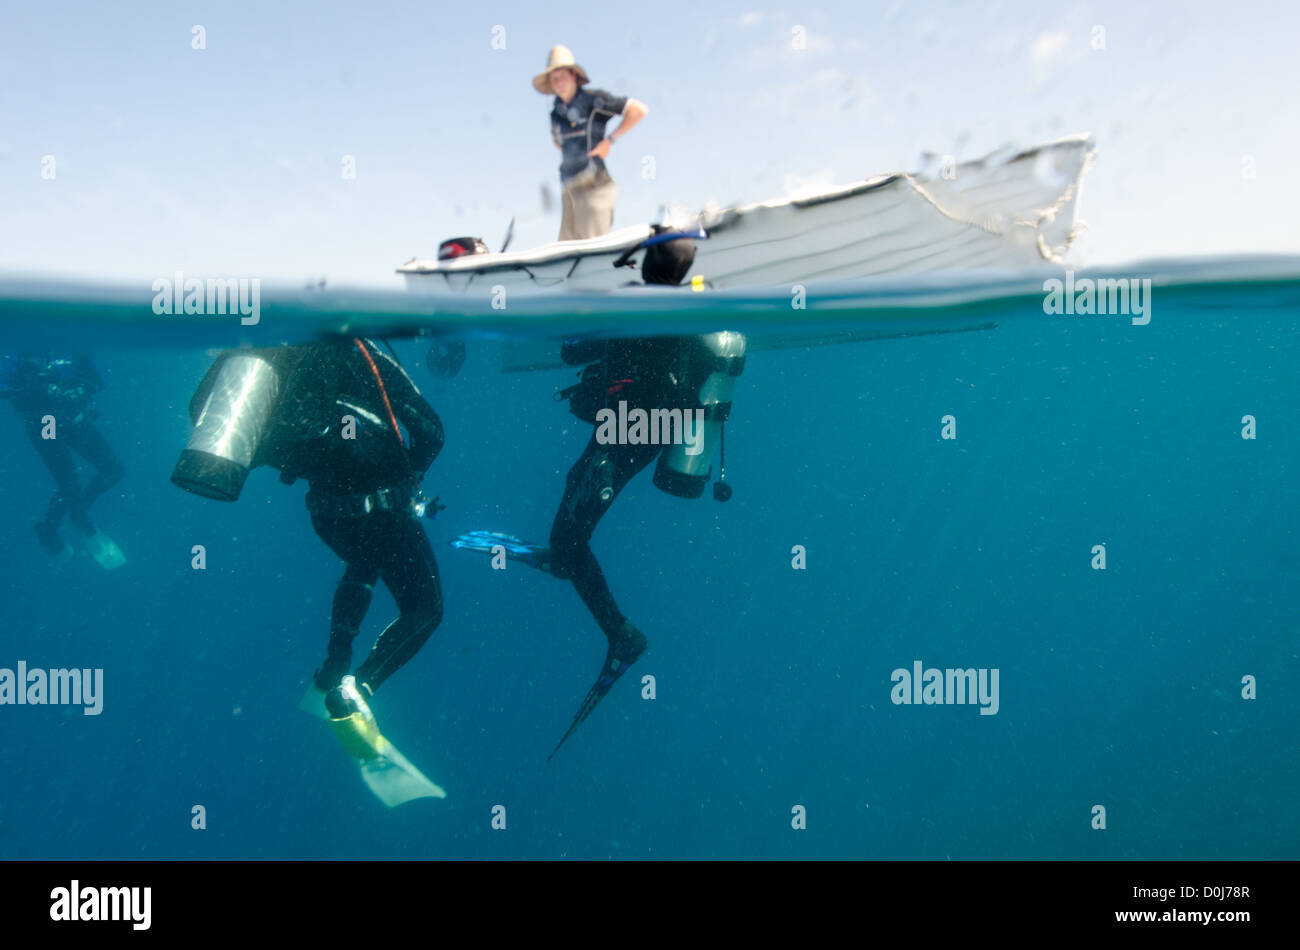 Three Scuba divers surface after a dive on the Great Barrier Reef to be picked up in a dinghy after a drift dive. Split photo with part underwater. Stock Photo